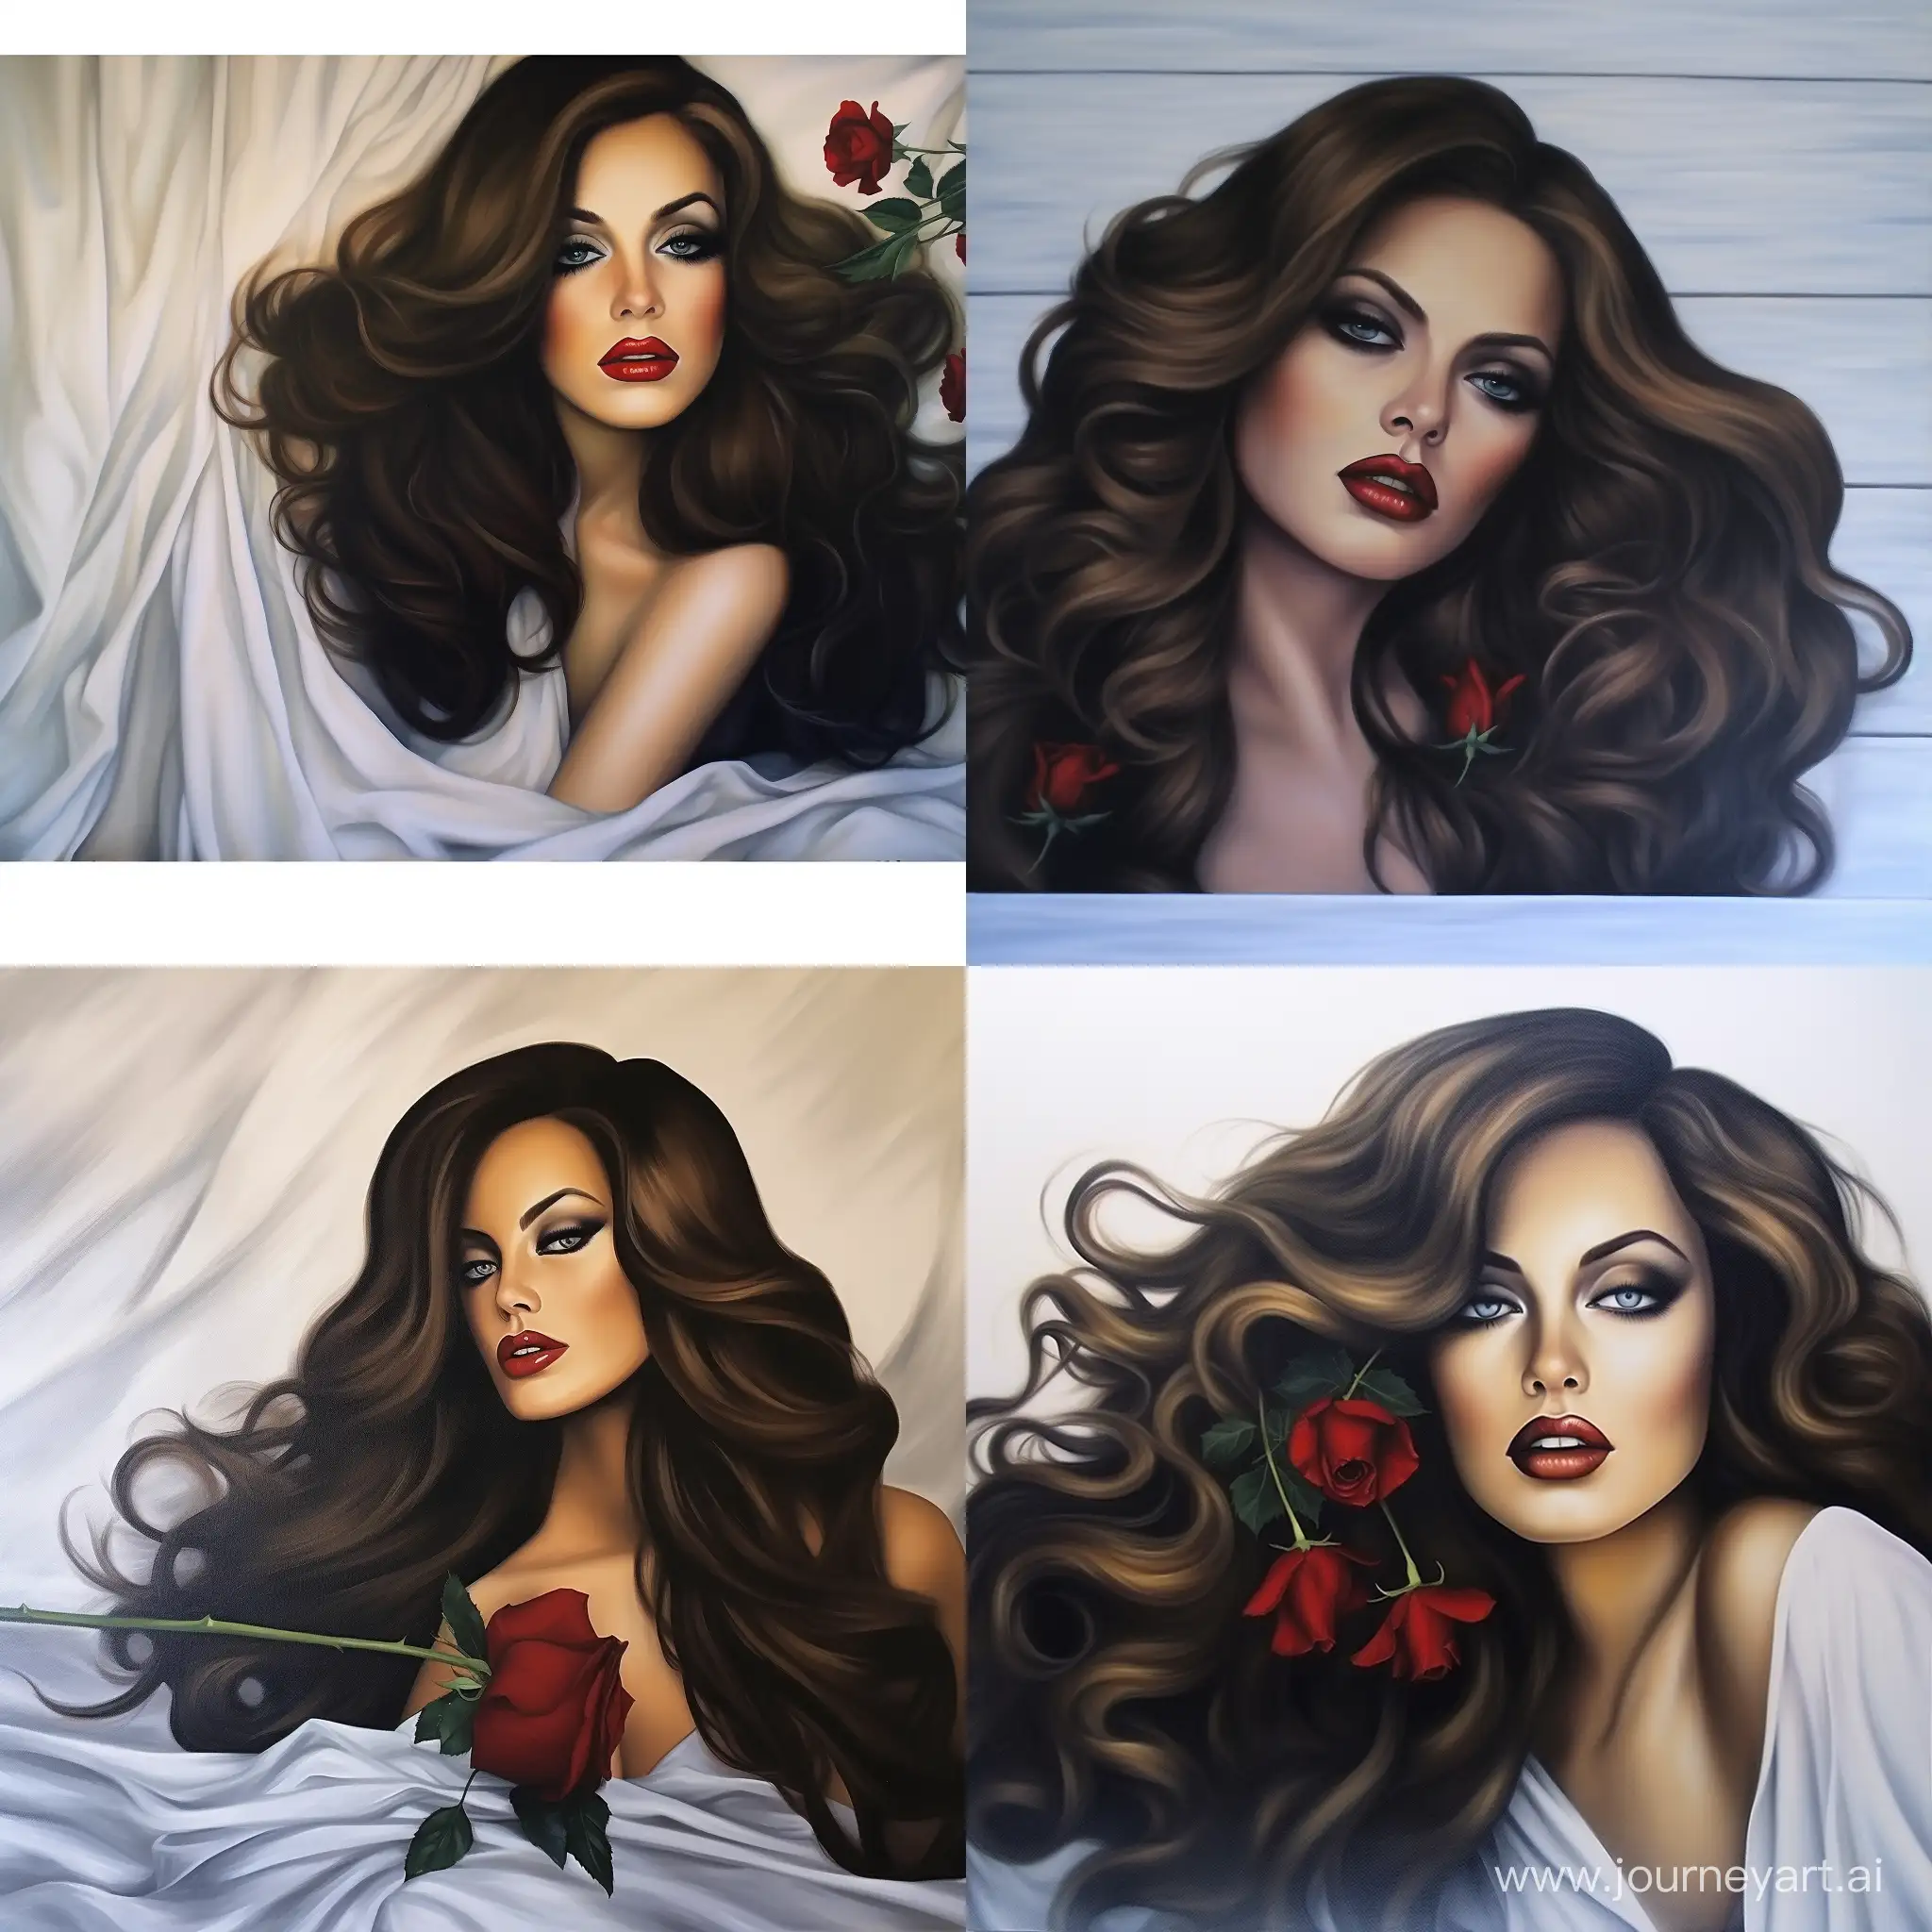 Passionate-Woman-with-Red-Rose-Petals-and-Blindfold-on-Silk-Sheets